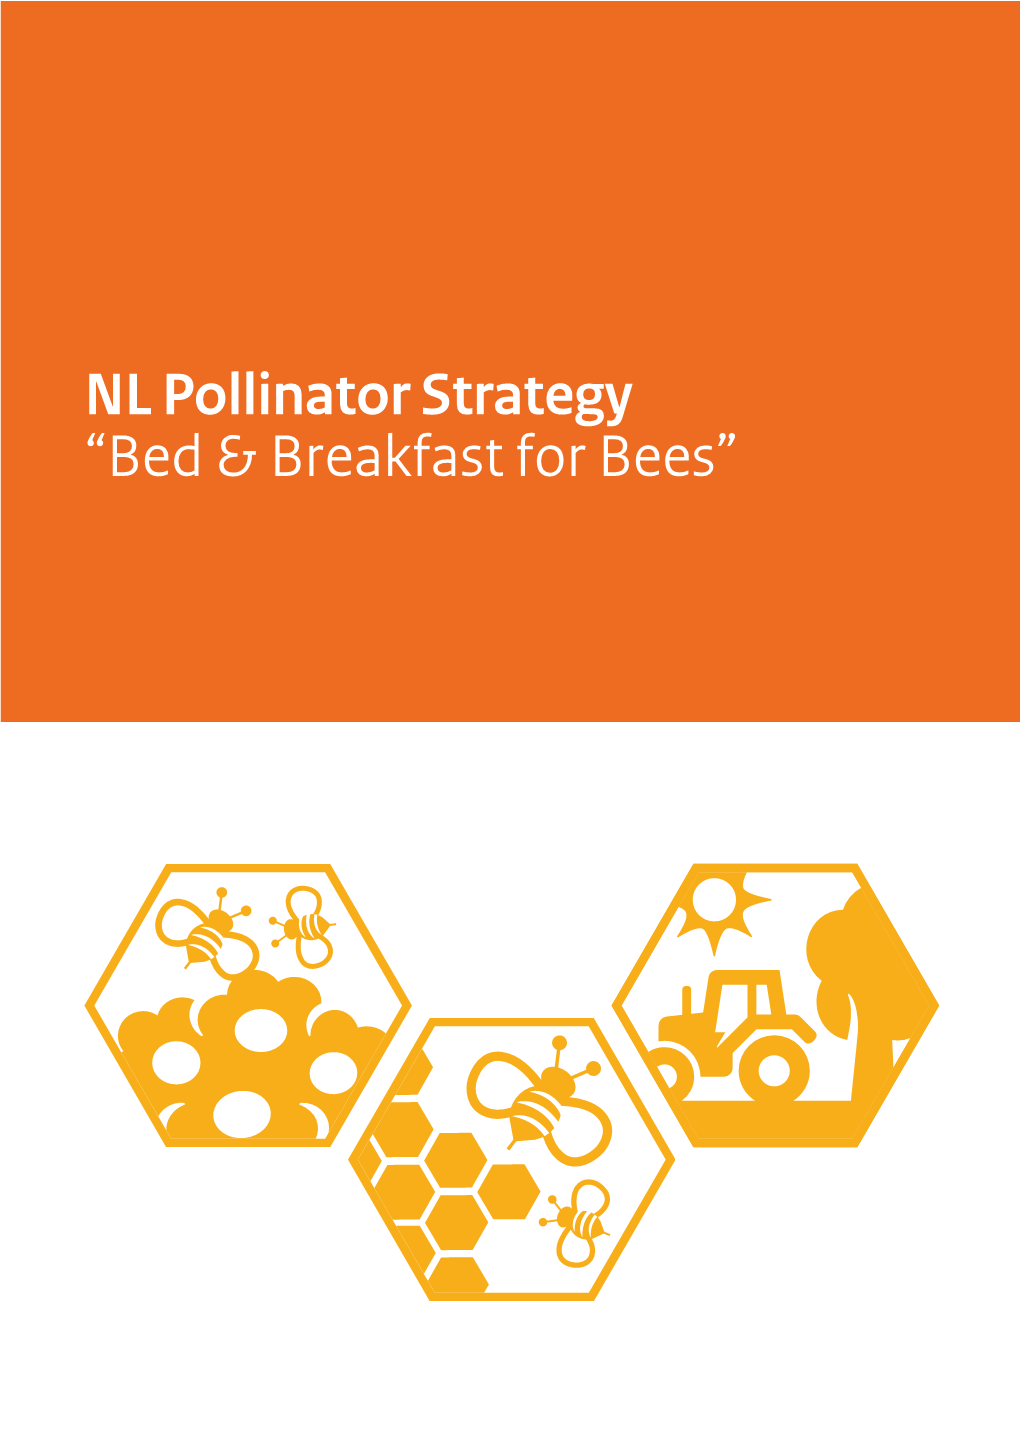 NL Pollinator Strategy “Bed & Breakfast for Bees”